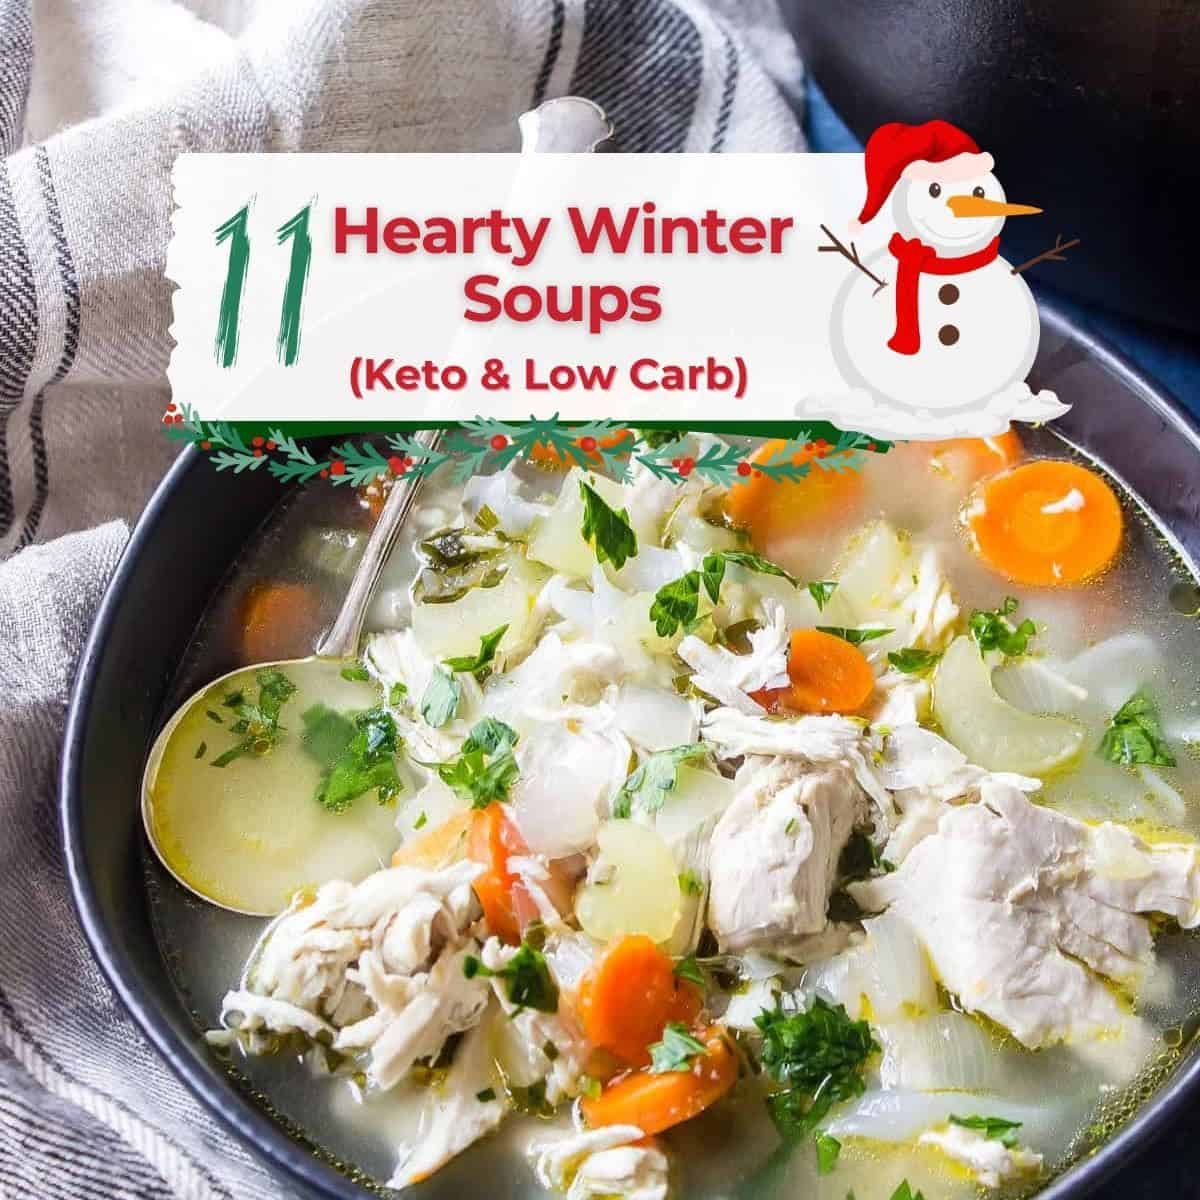 Keto chicken soup with colorful veggies served in a bowl with a spoon.